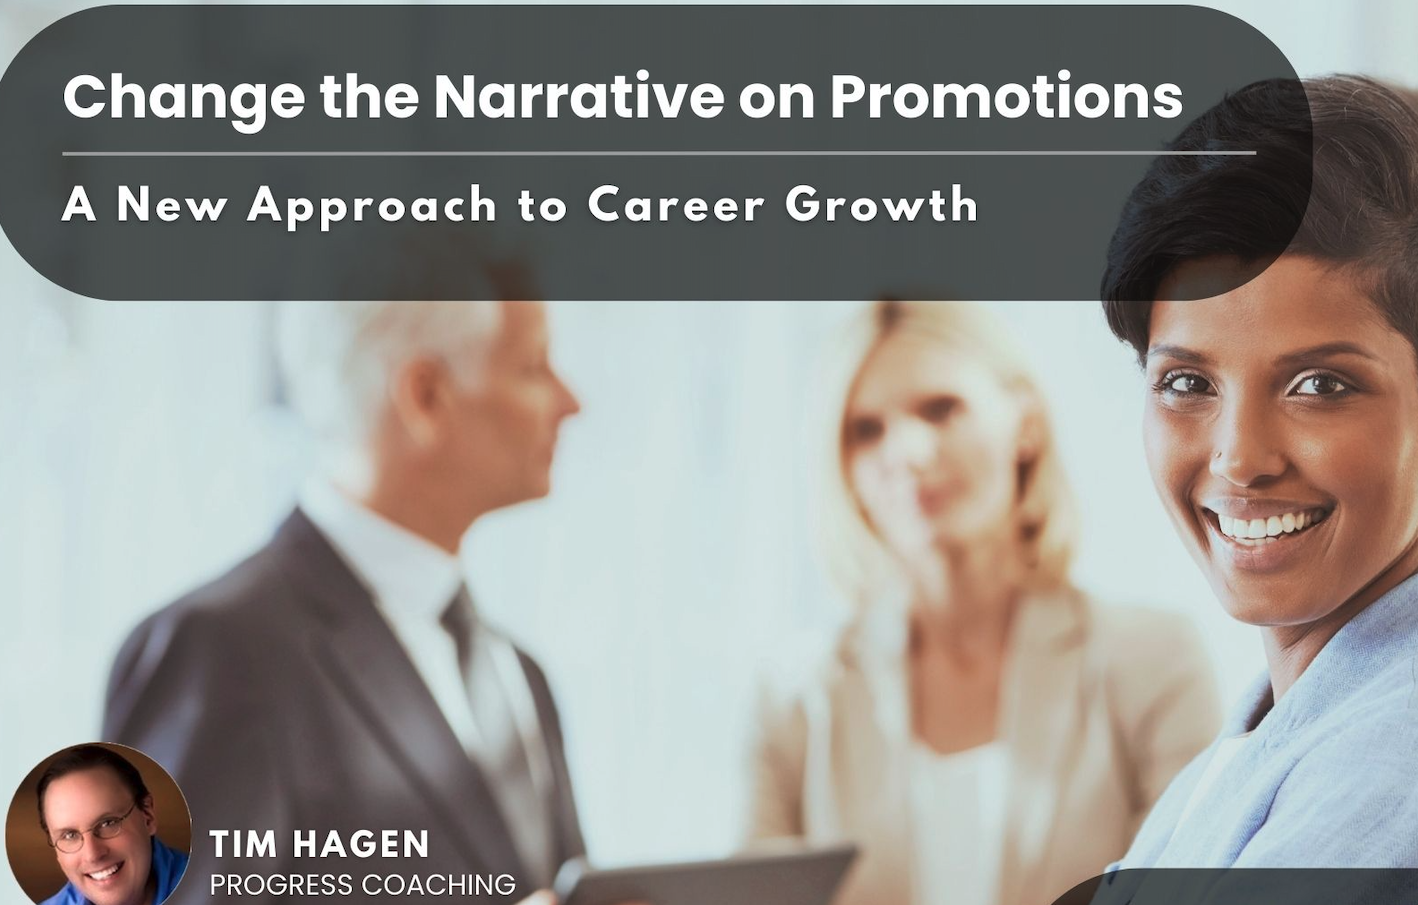 Change the Narrative on Promotions: A New Approach to Career Growth